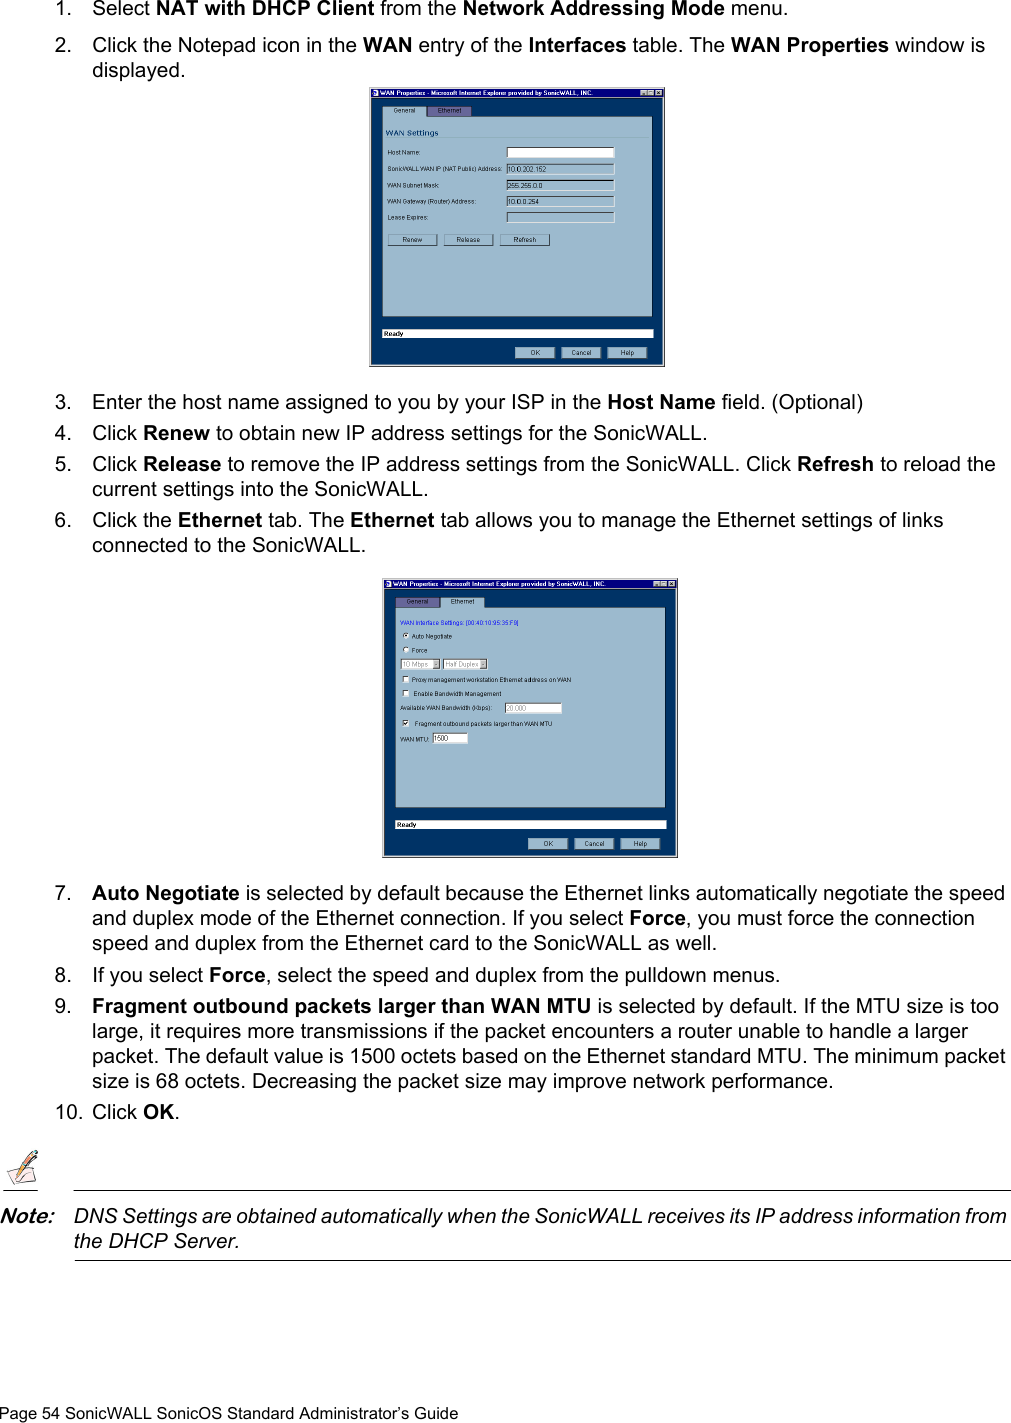 Page 54 SonicWALL SonicOS Standard Administrator’s Guide1. Select NAT with DHCP Client from the Network Addressing Mode menu. 2. Click the Notepad icon in the WAN entry of the Interfaces table. The WAN Properties window is displayed. 3. Enter the host name assigned to you by your ISP in the Host Name field. (Optional)4. Click Renew to obtain new IP address settings for the SonicWALL. 5. Click Release to remove the IP address settings from the SonicWALL. Click Refresh to reload the current settings into the SonicWALL. 6. Click the Ethernet tab. The Ethernet tab allows you to manage the Ethernet settings of links connected to the SonicWALL. 7. Auto Negotiate is selected by default because the Ethernet links automatically negotiate the speed and duplex mode of the Ethernet connection. If you select Force, you must force the connection speed and duplex from the Ethernet card to the SonicWALL as well.8. If you select Force, select the speed and duplex from the pulldown menus. 9. Fragment outbound packets larger than WAN MTU is selected by default. If the MTU size is too large, it requires more transmissions if the packet encounters a router unable to handle a larger packet. The default value is 1500 octets based on the Ethernet standard MTU. The minimum packet size is 68 octets. Decreasing the packet size may improve network performance. 10. Click OK. Note:DNS Settings are obtained automatically when the SonicWALL receives its IP address information from the DHCP Server. 